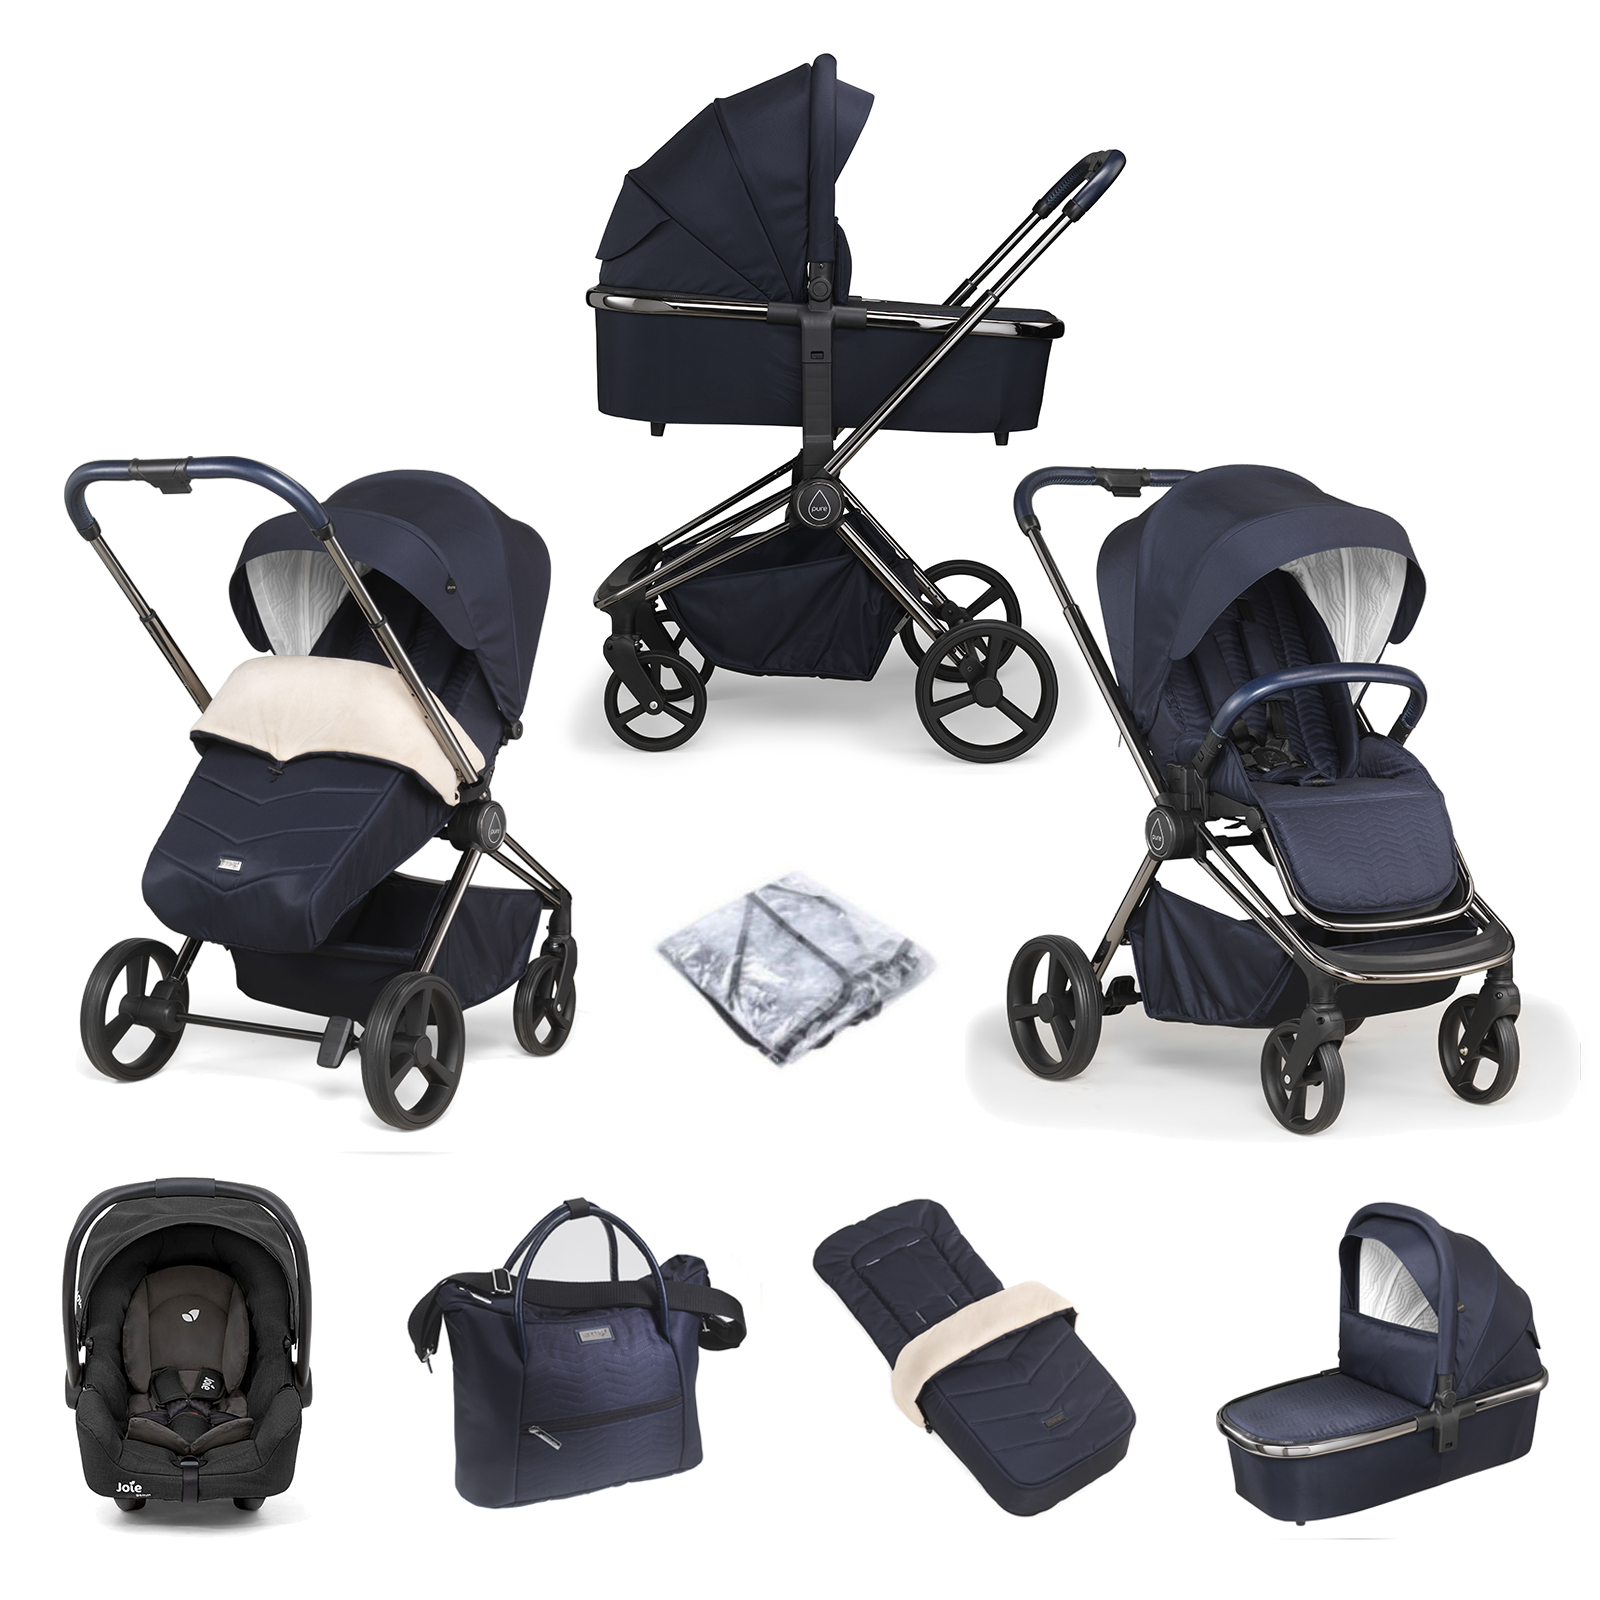 Mee-go Pure (Gemm) Travel System with Accessories - True Blue 